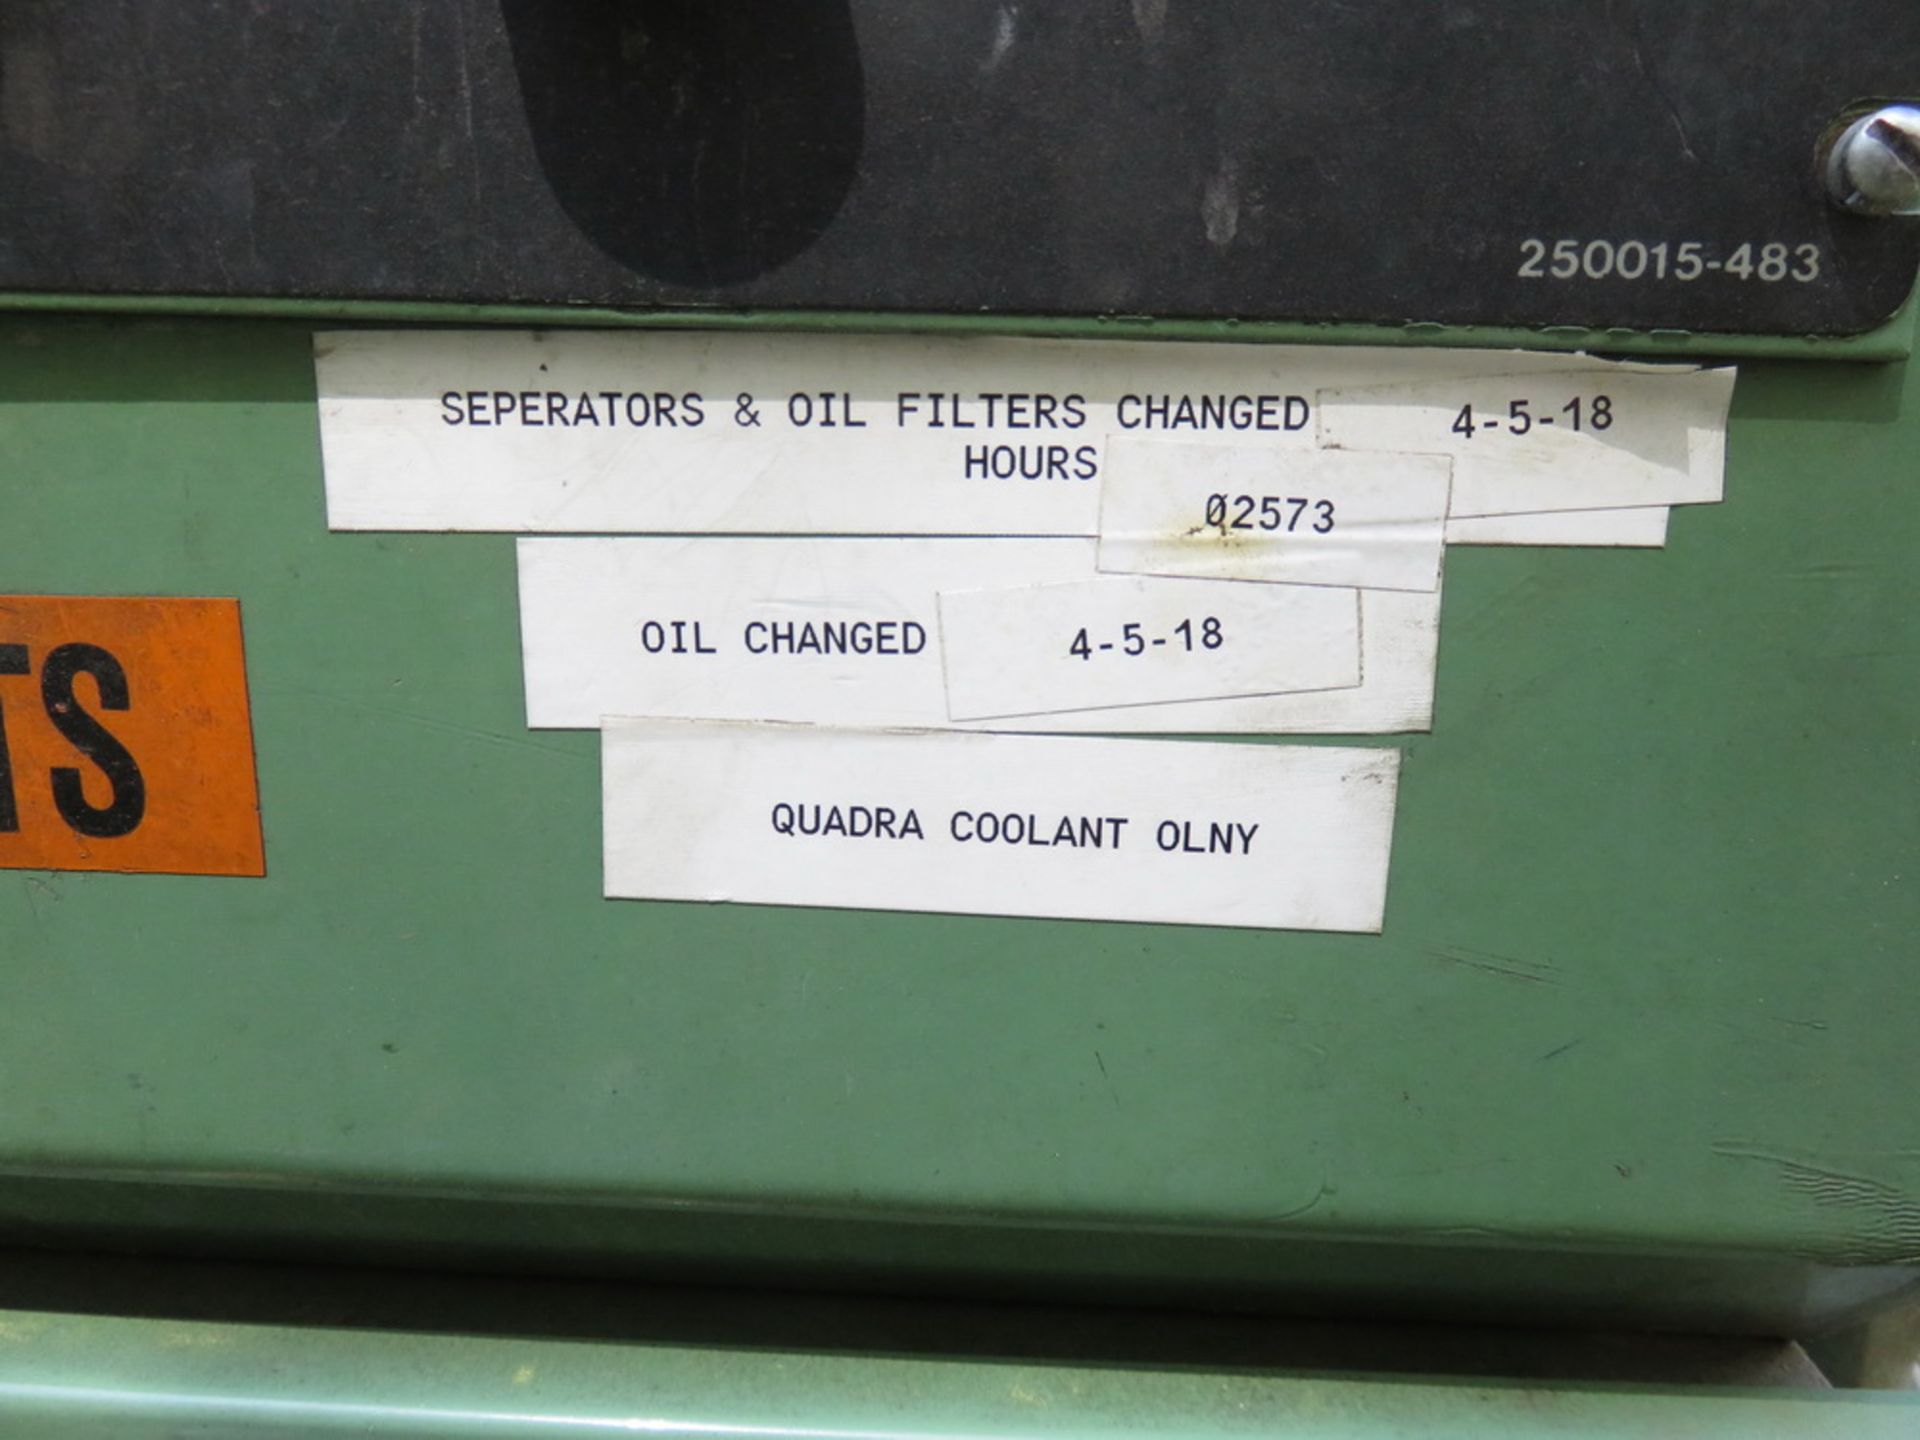 Sullair LS25-200L ACAC 24KT Rotary Screw Air Compressor - Image 7 of 7